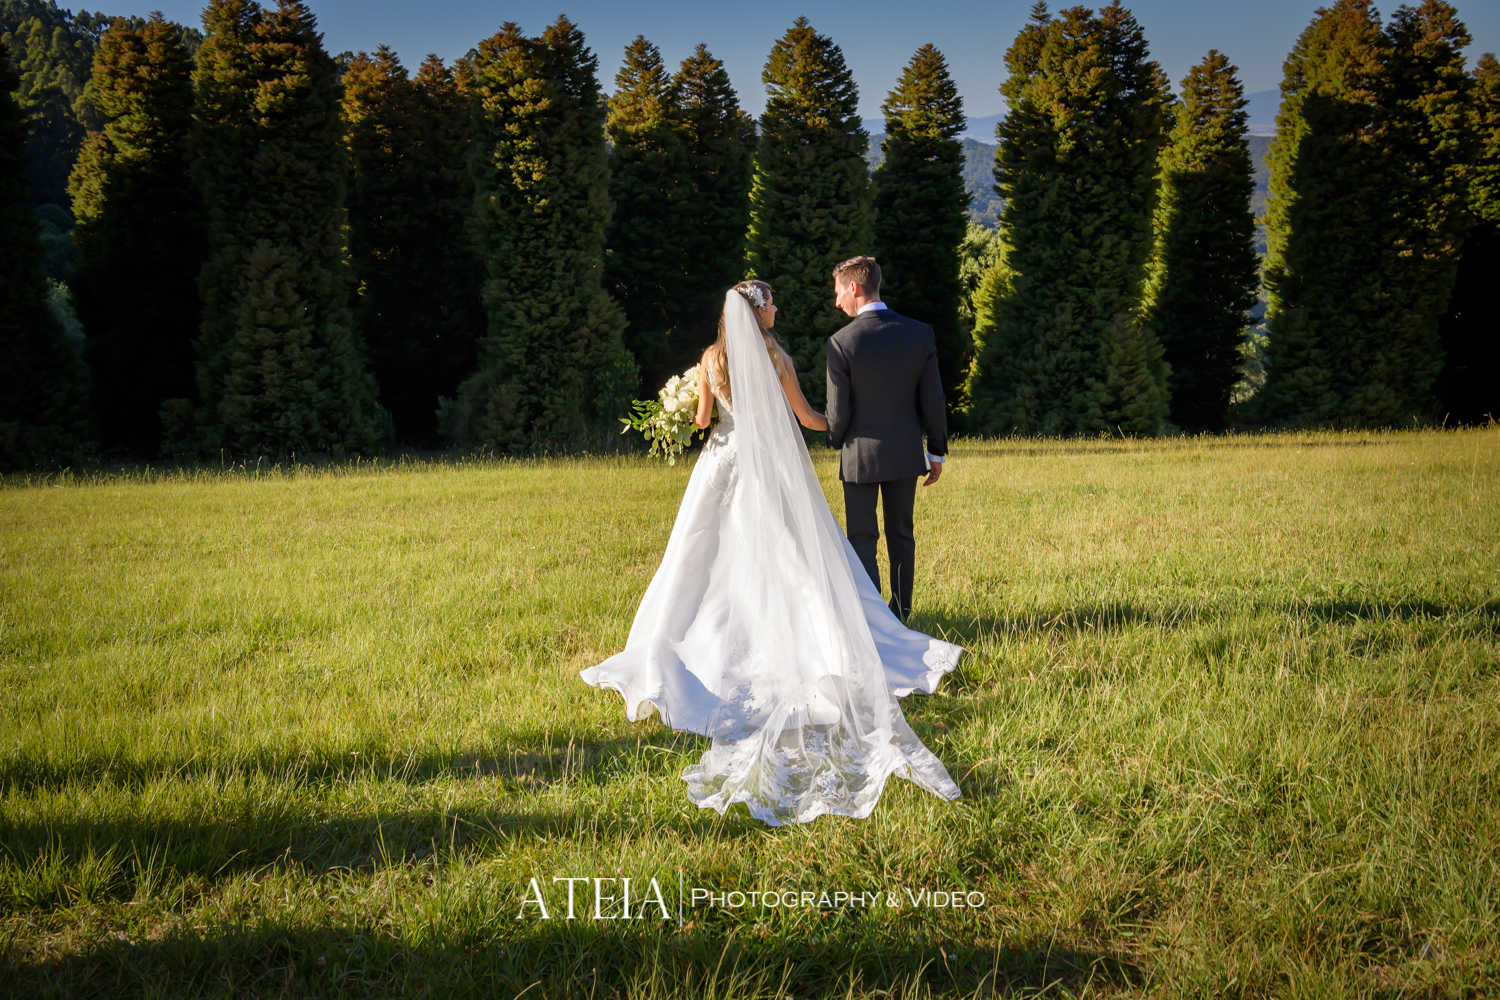 , Lyrebird Falls Wedding Photography Melbourne by ATEIA Photography &#038; Video